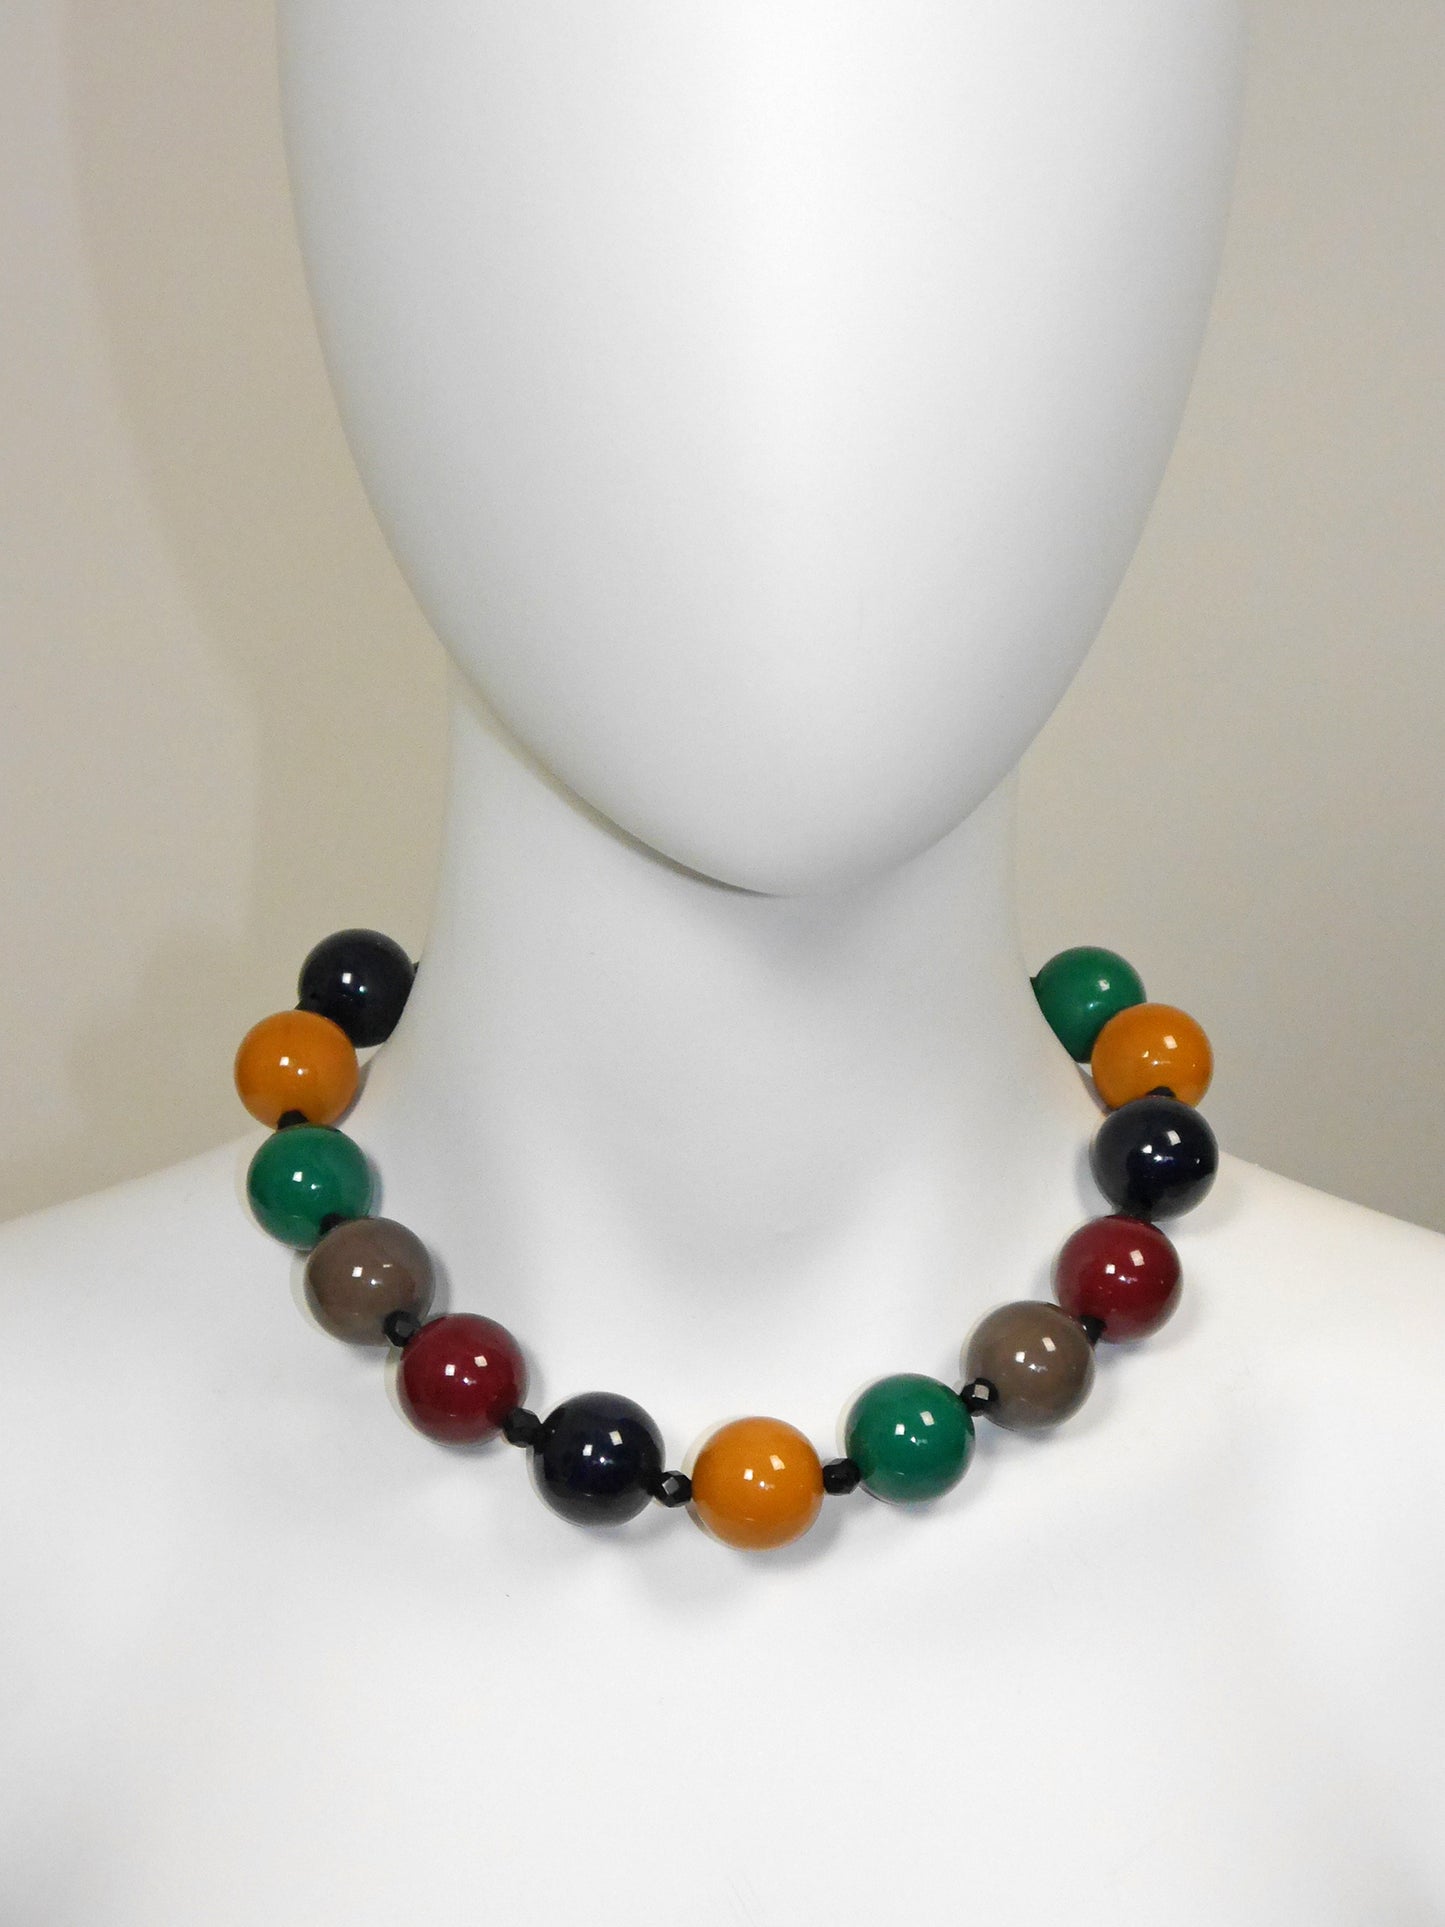 YVES SAINT LAURENT by Roger Scemama 1970s Vintage Chunky Beads Necklace